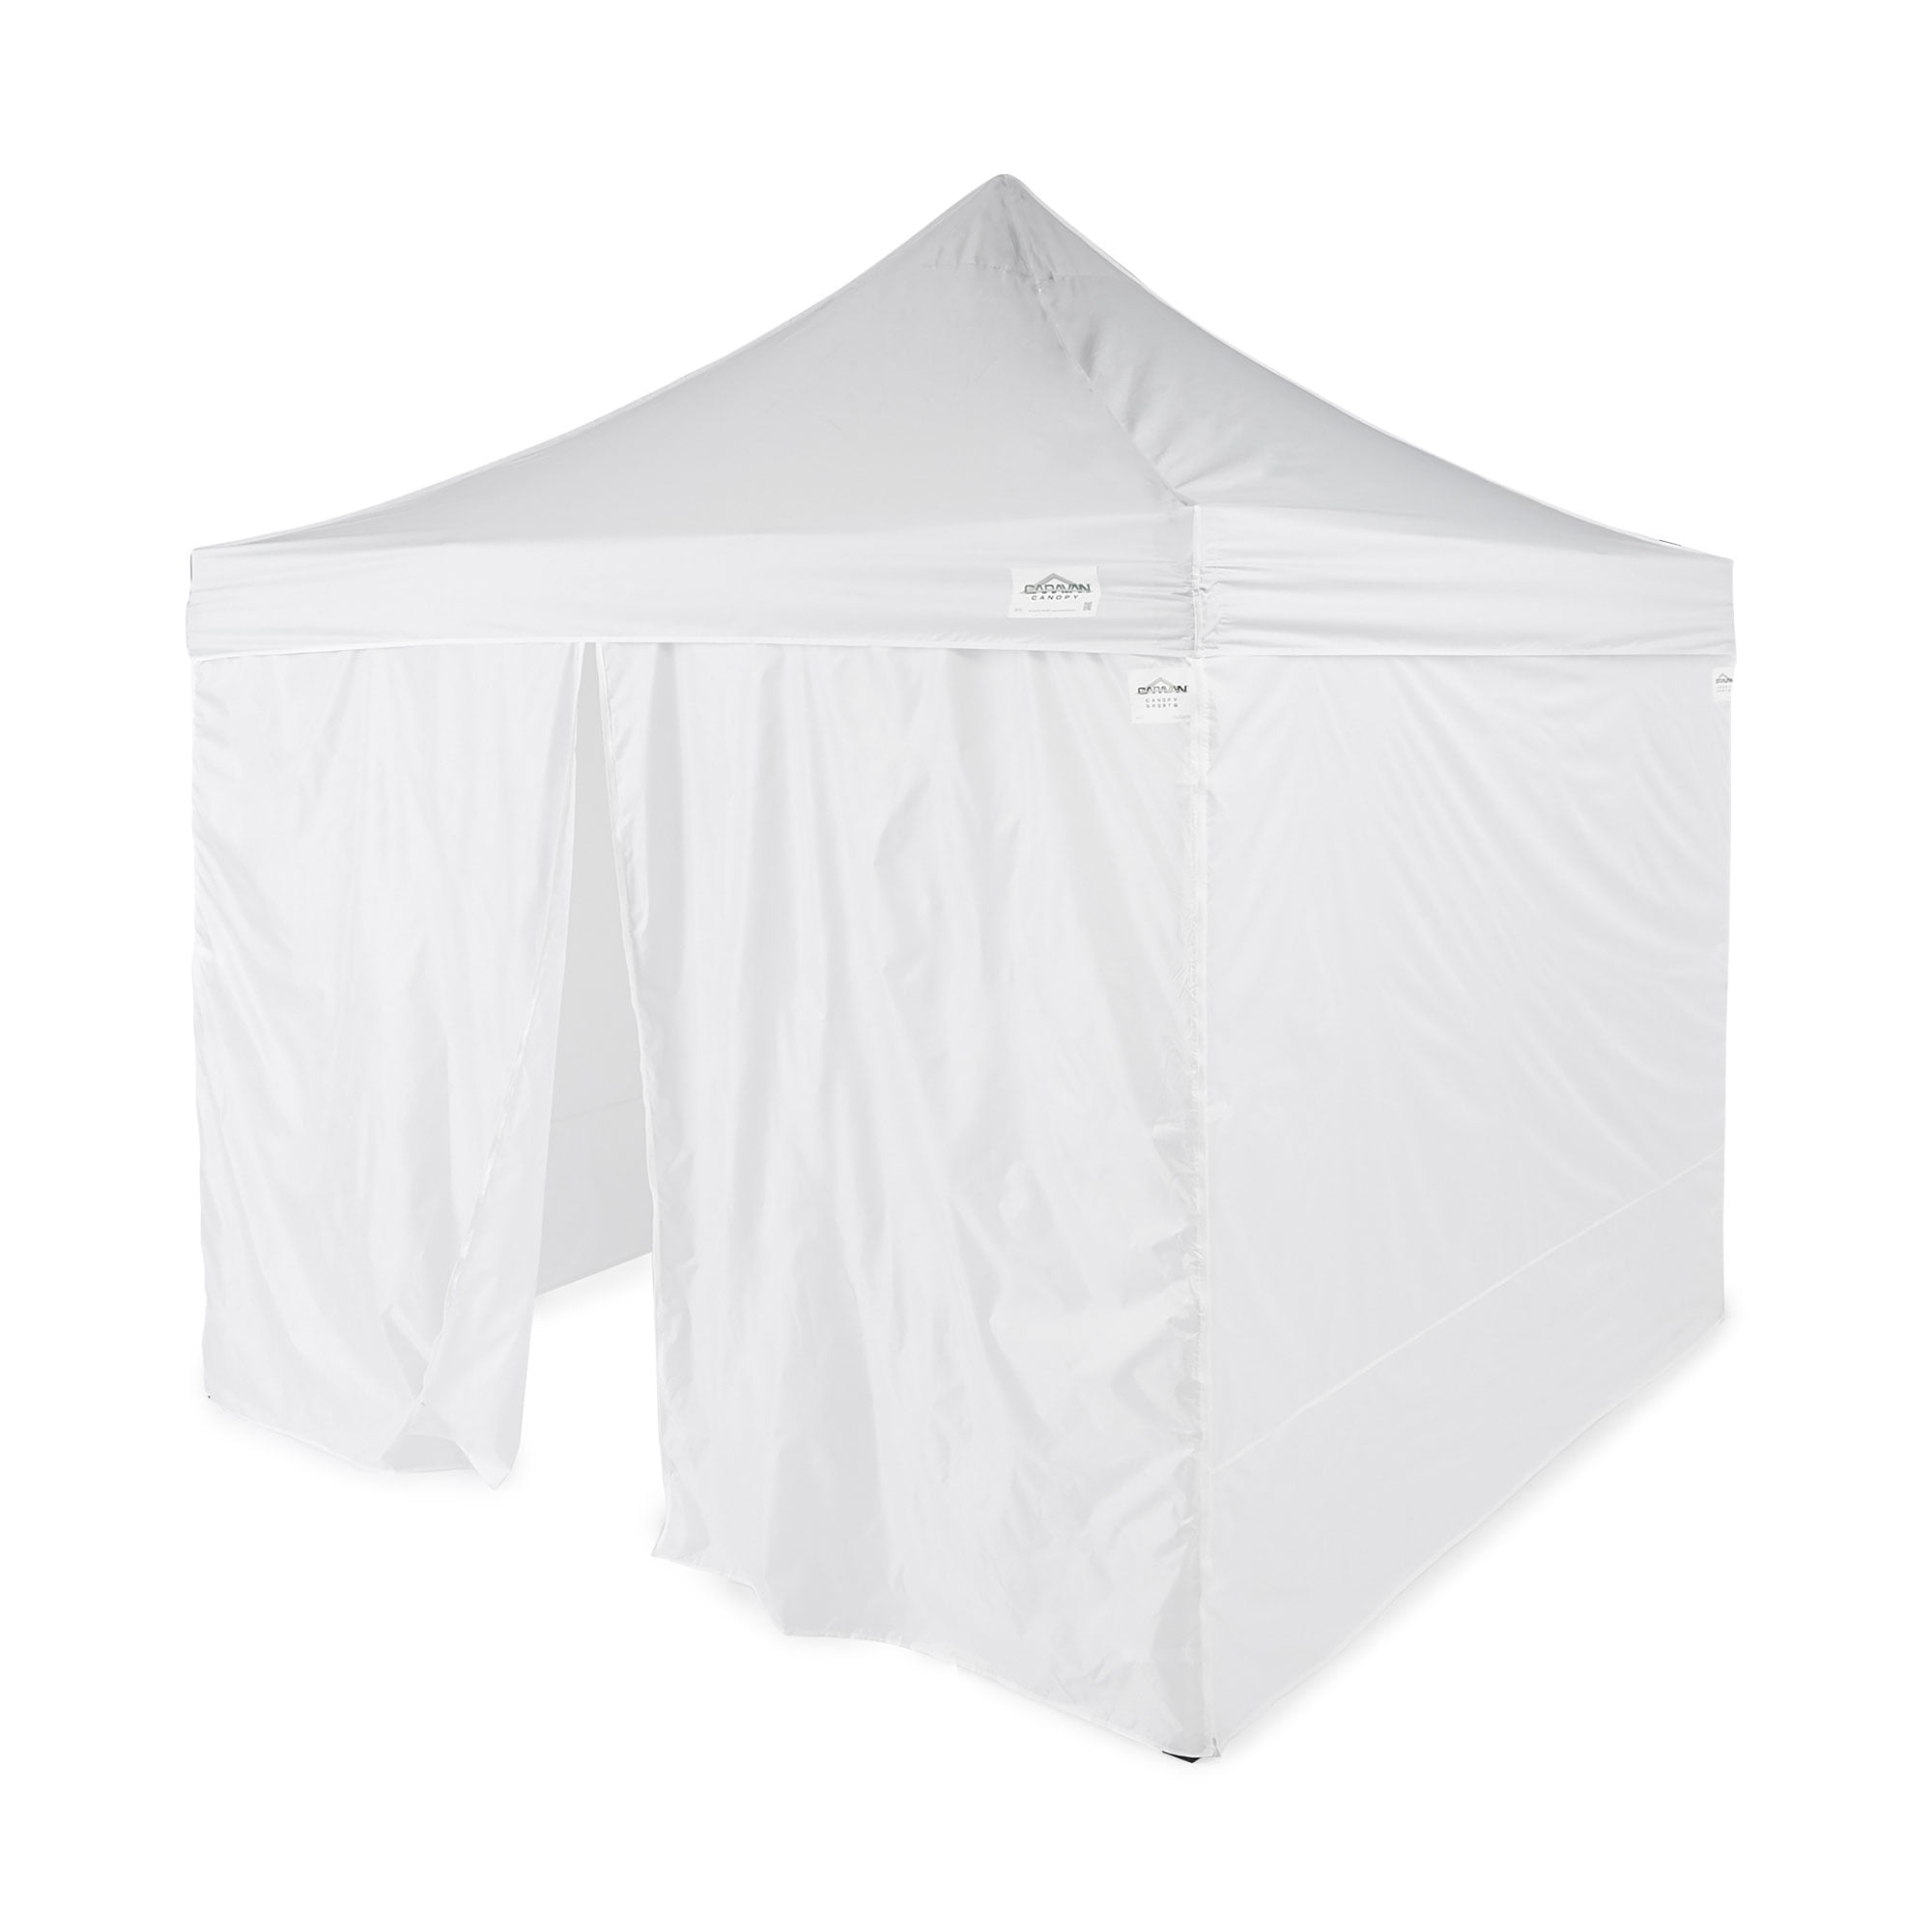 w/ 2 zippers of 20",clear vinyl disposable for Ohio pediatric tent,3pk Canopy 